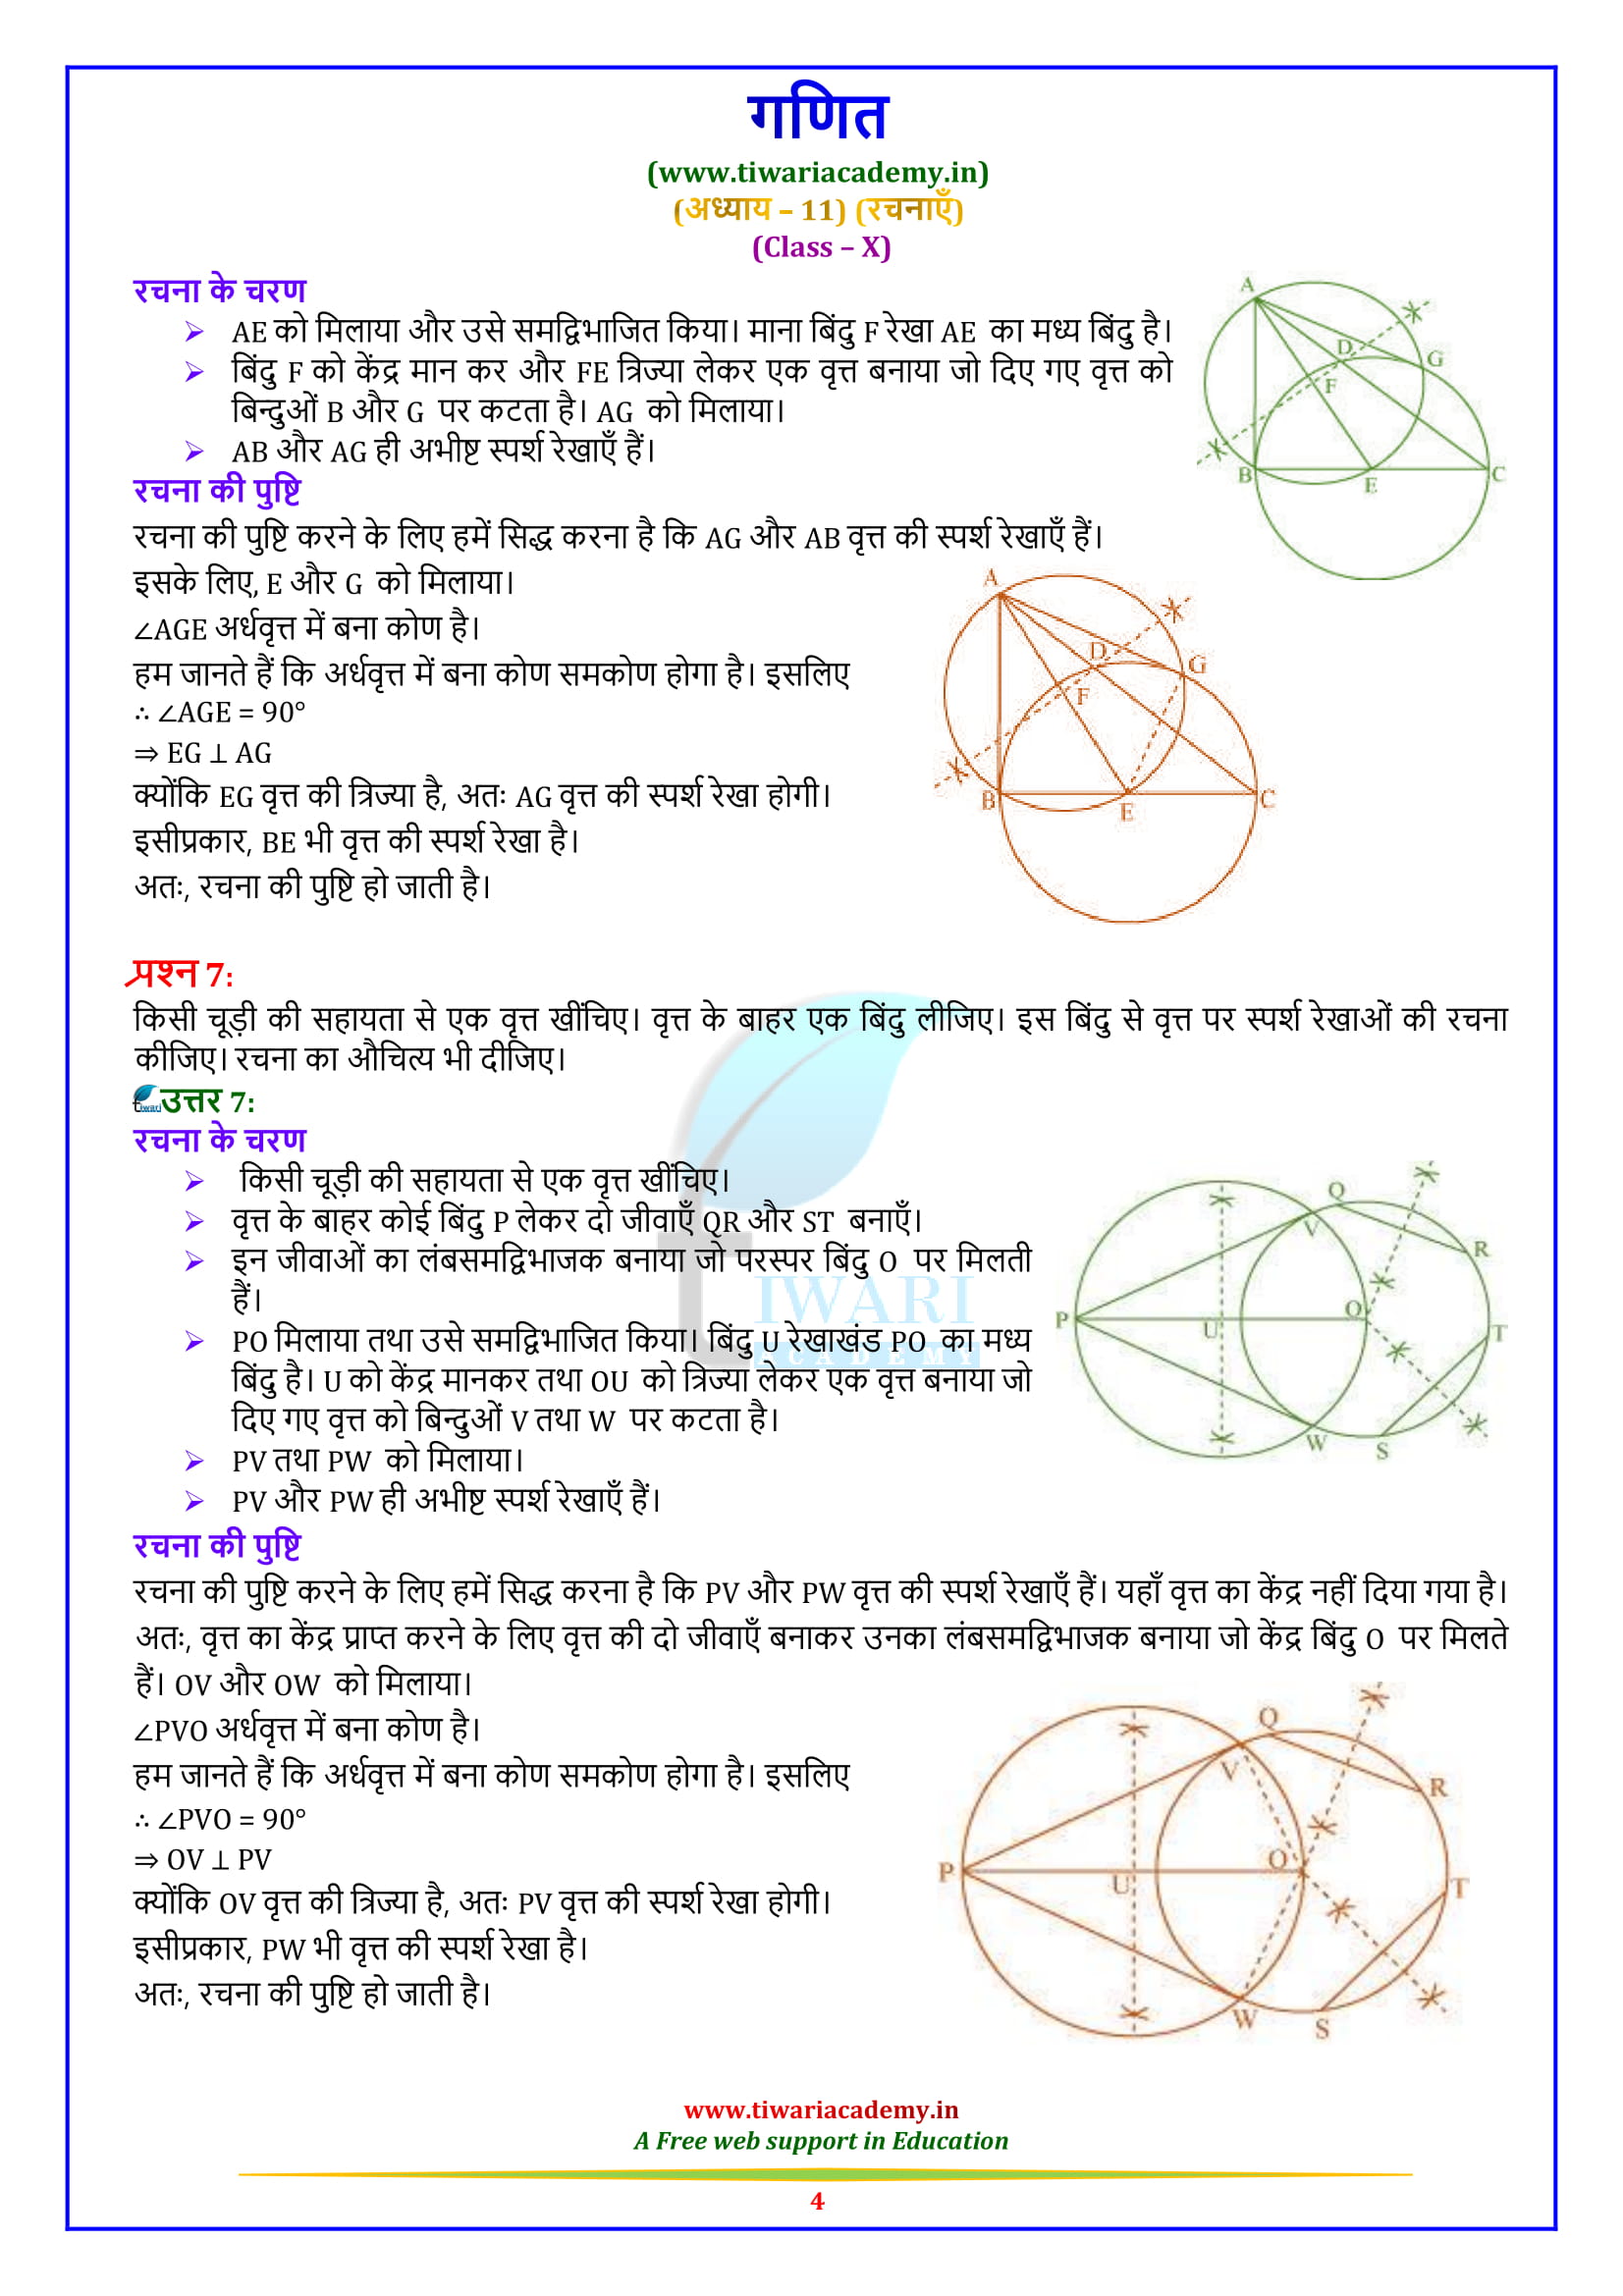  10 Maths exercise 12.2 question 1, 2, 3, 4, 5, 6, 7, 8, 